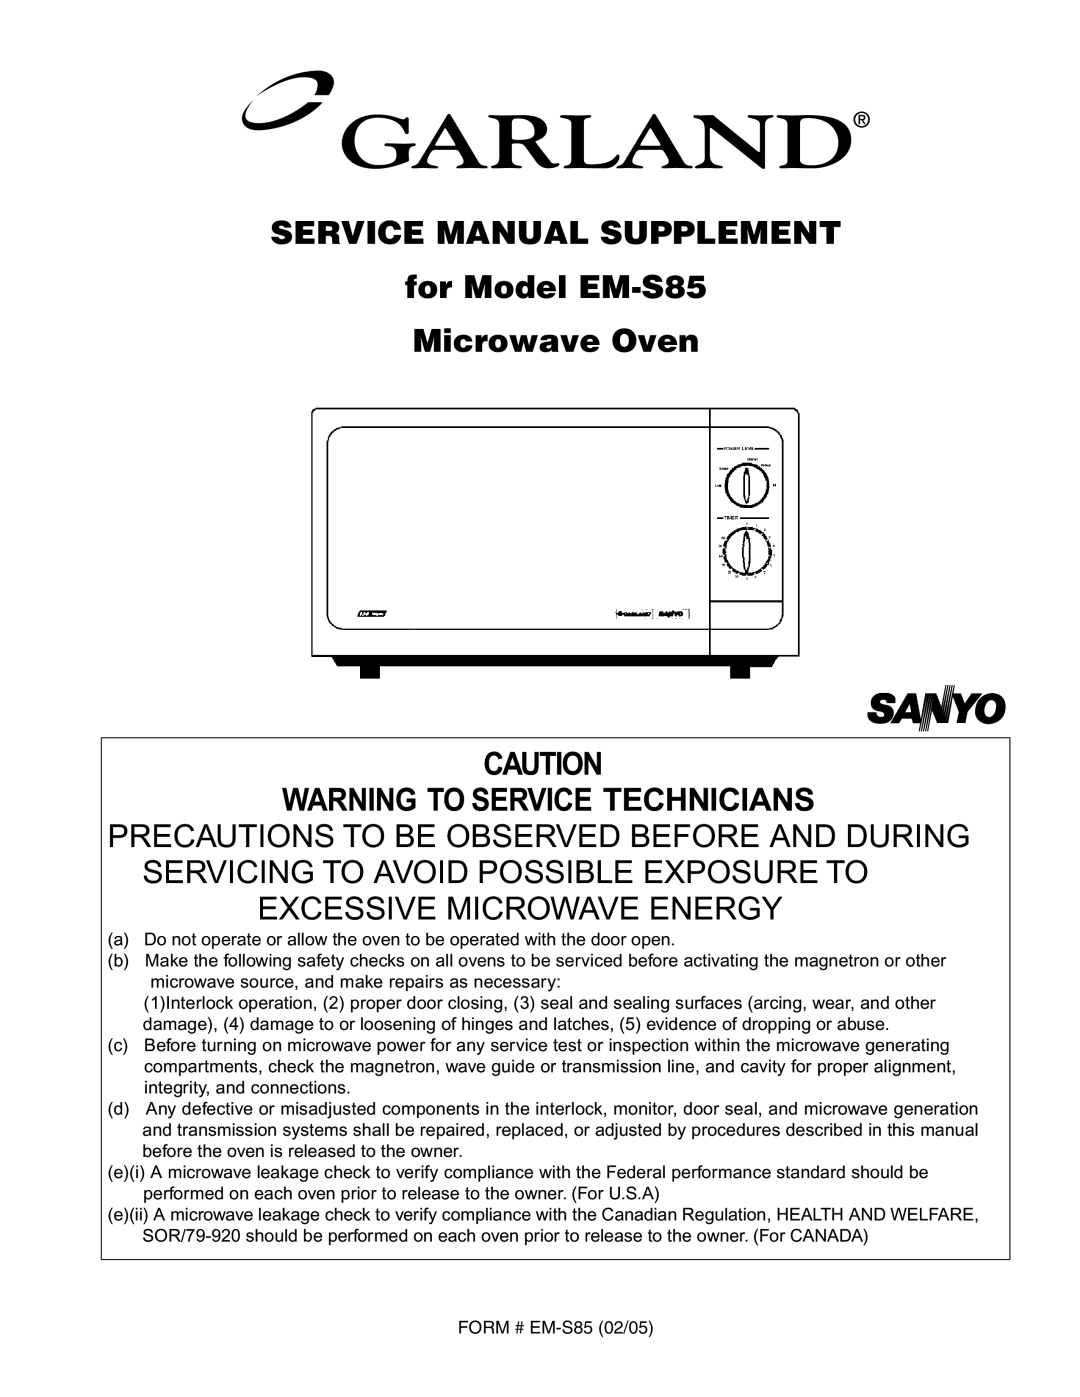 Garland service manual Service Manual Supplement, for Model EM-S85Microwave Oven, Warning To Service Technicians 